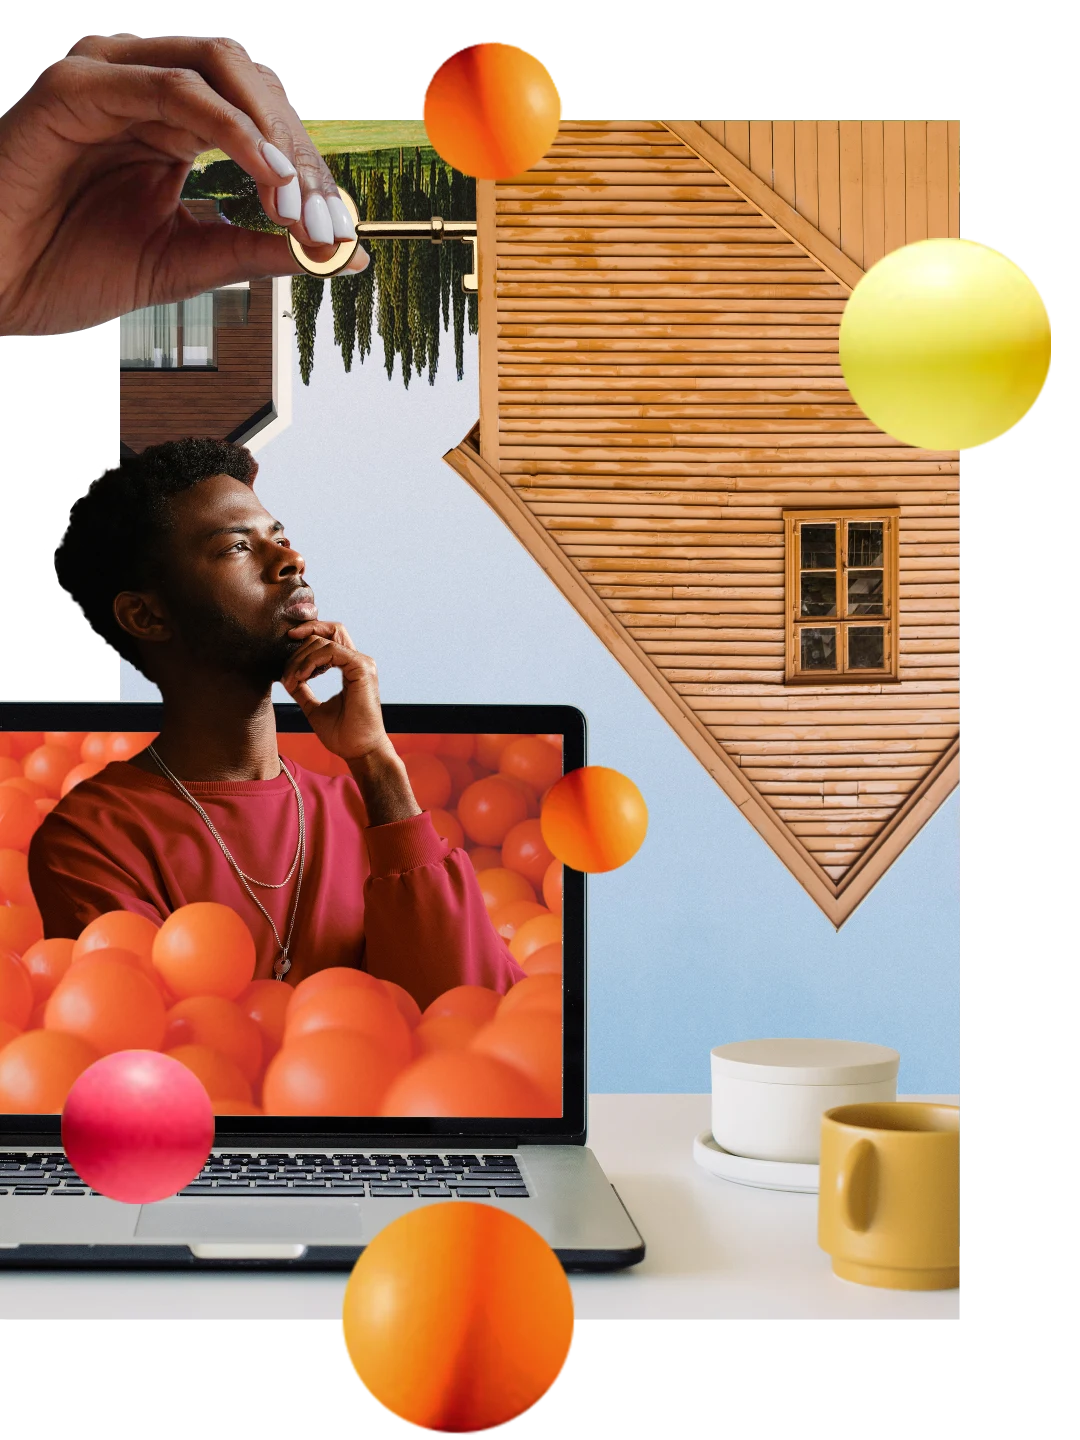 Collage of realty themes. Black hand turns the key to an upside-down wooden house. Upside-down, red A-frame house next to a forest in the background. Black man in a red shirt in a pensive pose, coming out of a laptop with orange balls. Coffee cups on a white table.
